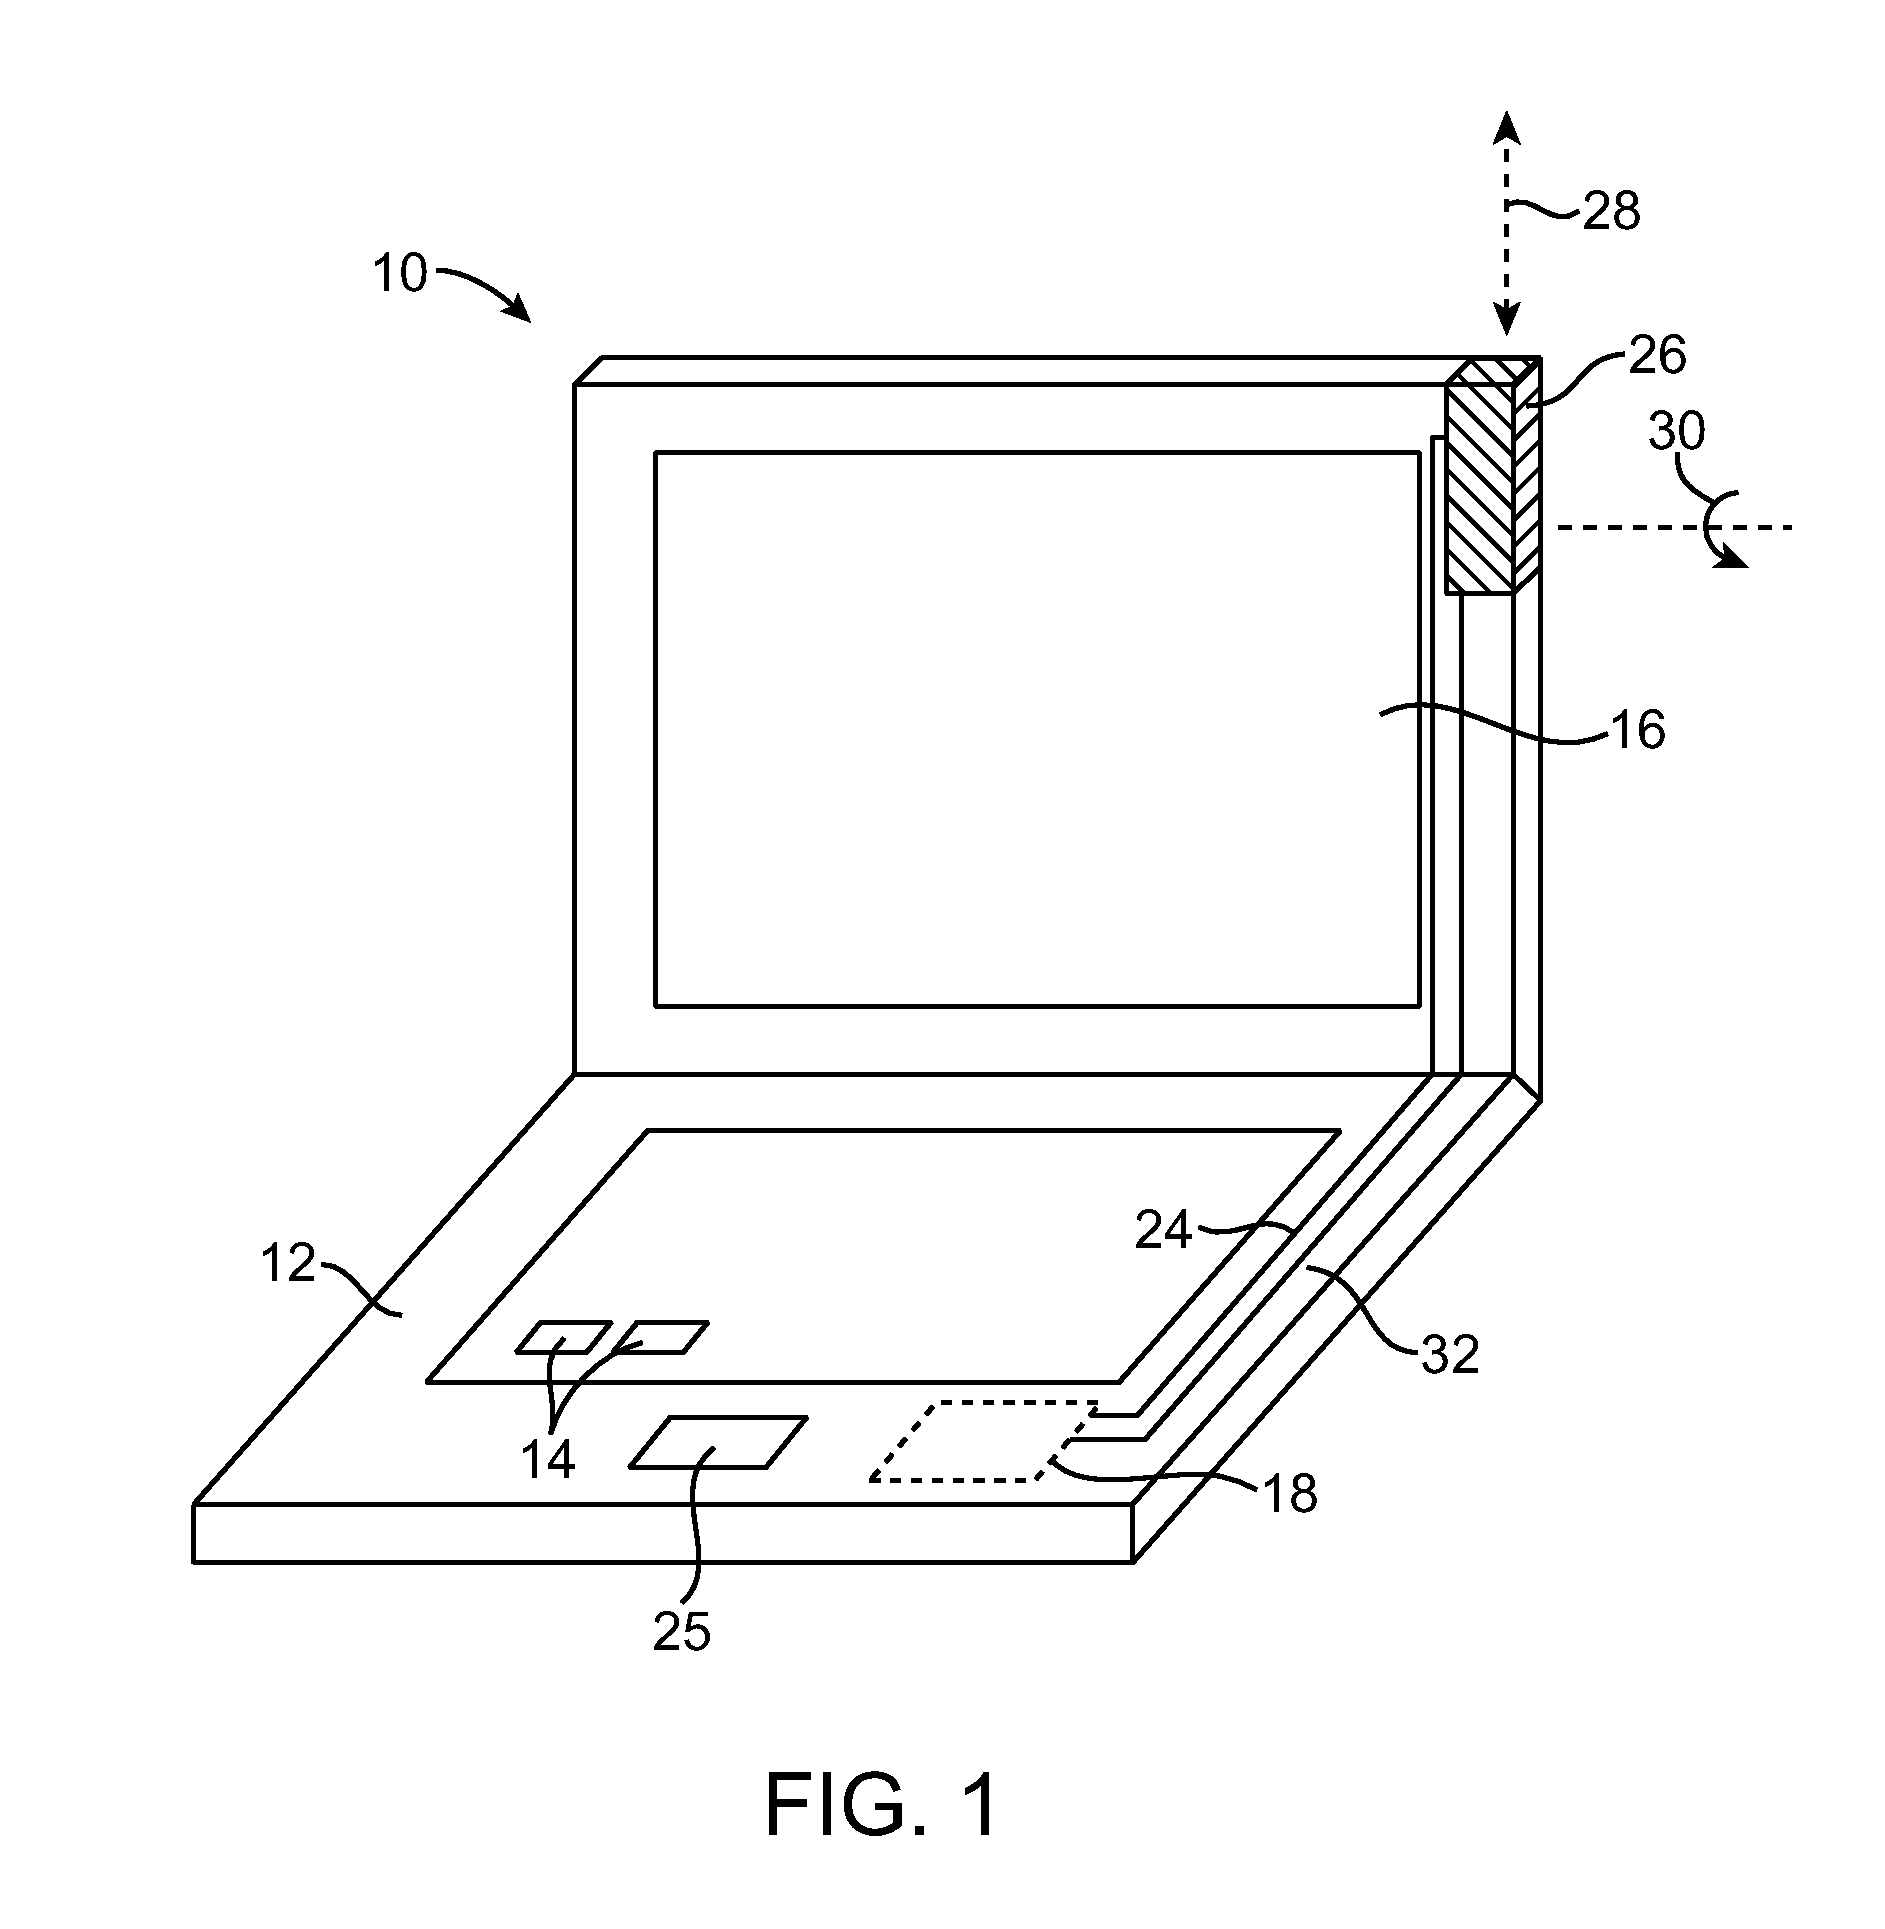 Removable antennas for electronic devices